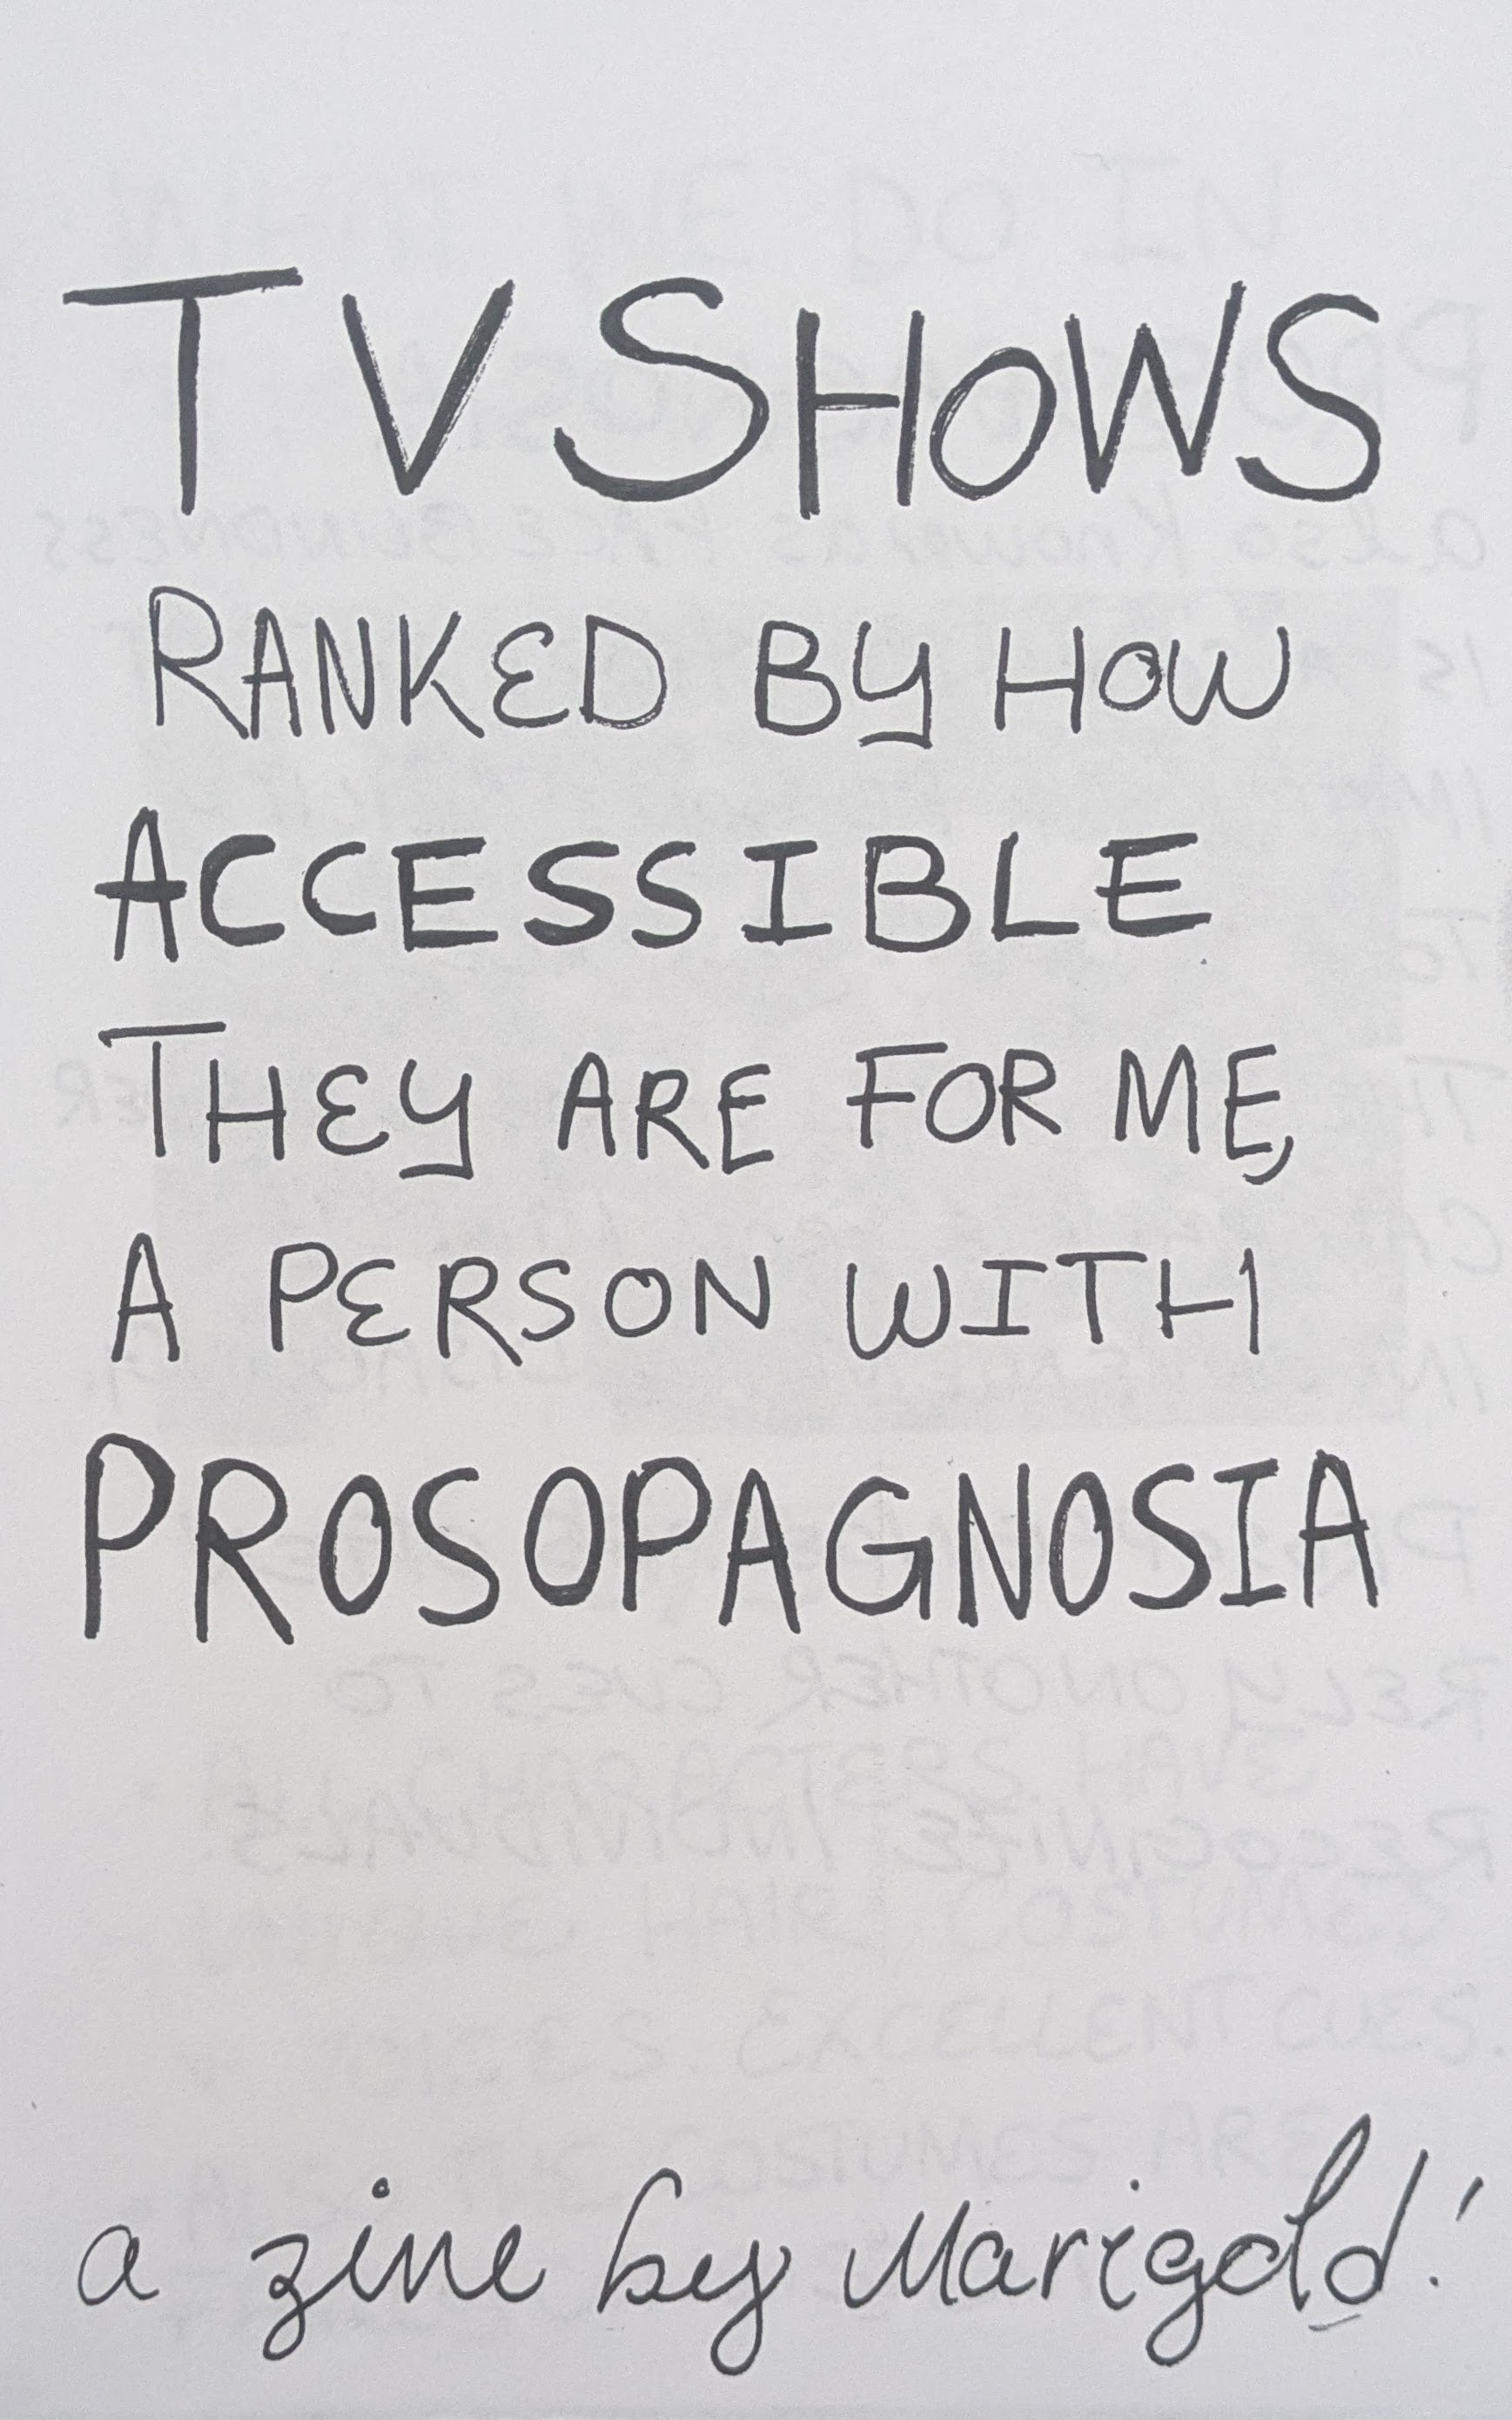 The cover of the zine “TV Shows Ranked by how Accessible They are for Me, a Person with Prosopagnosia.” The words are hand-lettered.